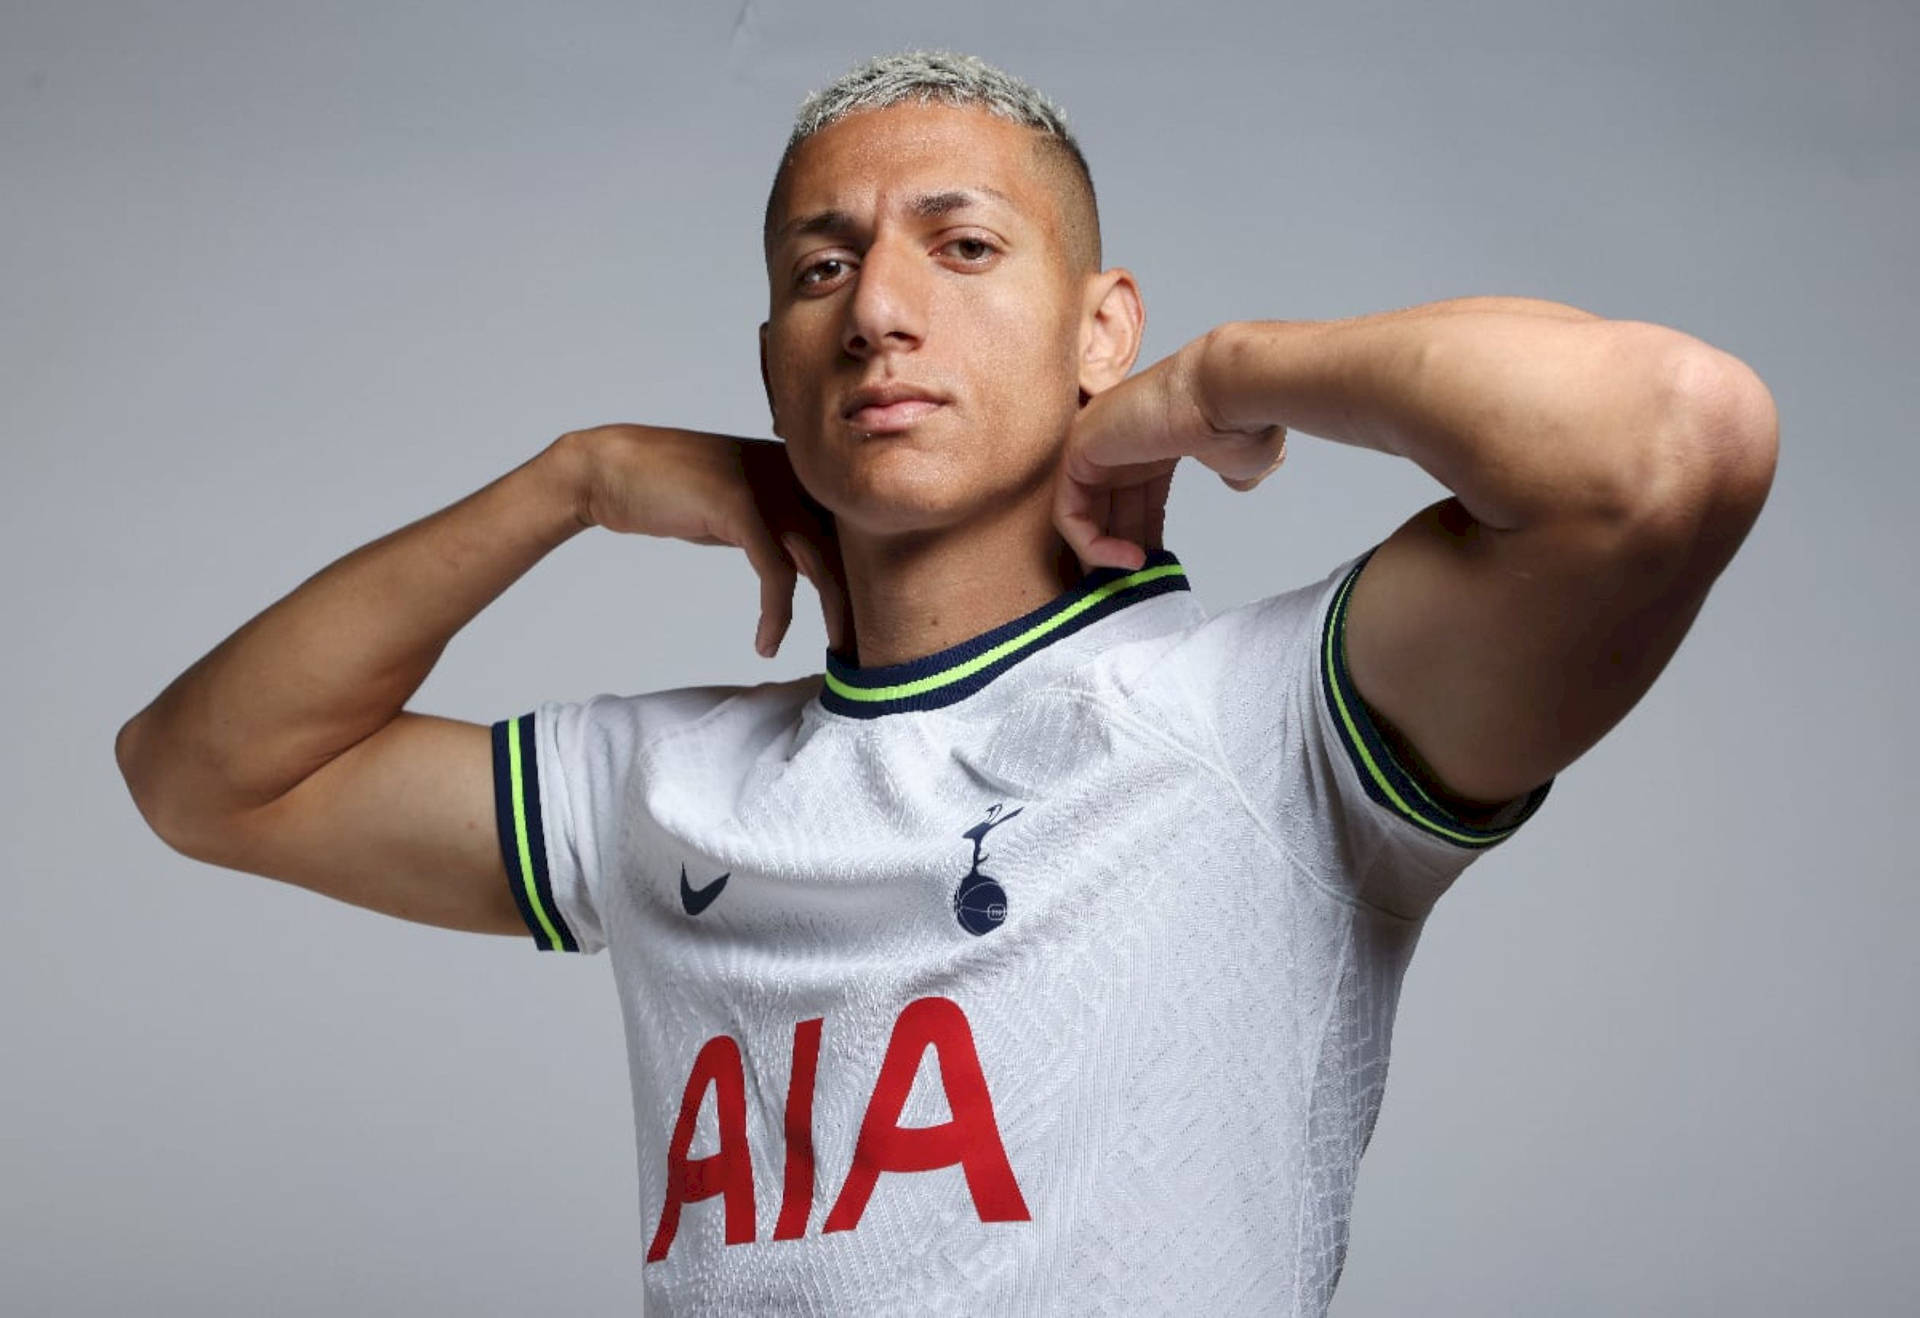 Richarlisonde Andrade Visar Upp Sina Muskler - In The Context Of Computer Or Mobile Wallpaper, This Could Be A Caption For An Image Of Richarlison Flexing His Arms. Wallpaper